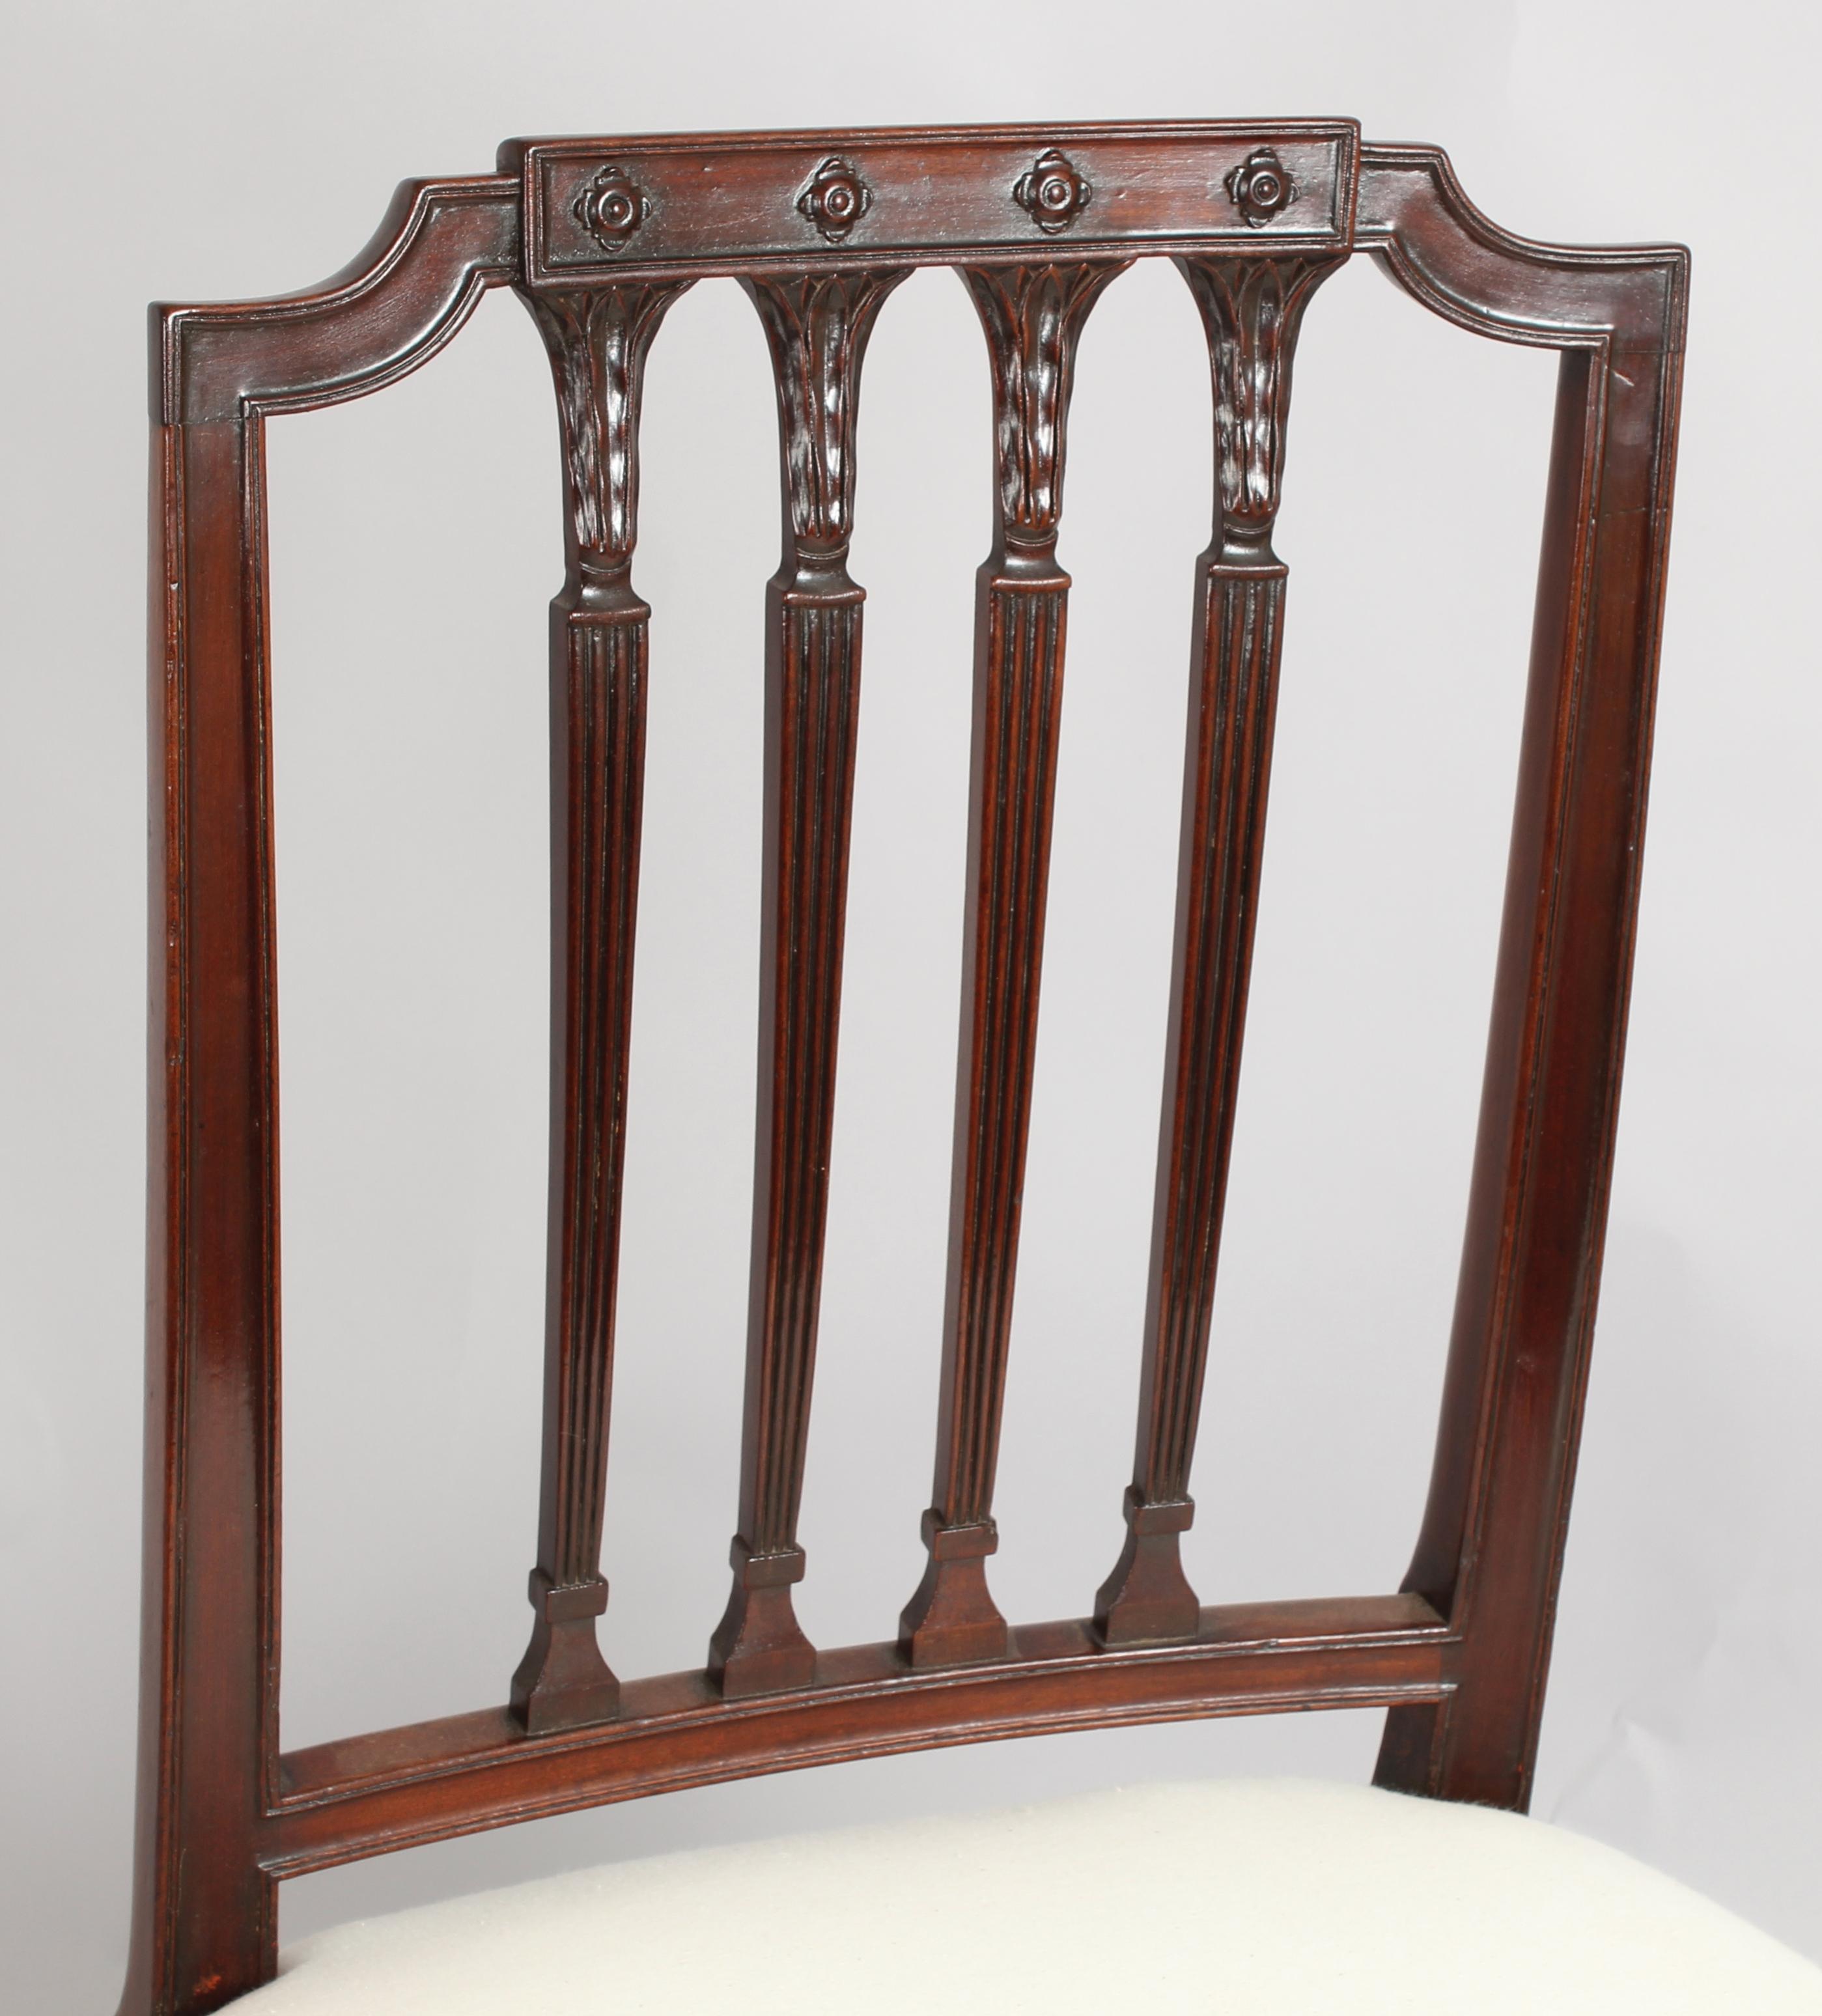 A set of six fine George III period mahogany dining-chairs in the Hepplewhite style; the backs with channelled frames, a central tablet with carved florets and four reeded splats with water-leaf headings: the stuffover seats re-upholstered and